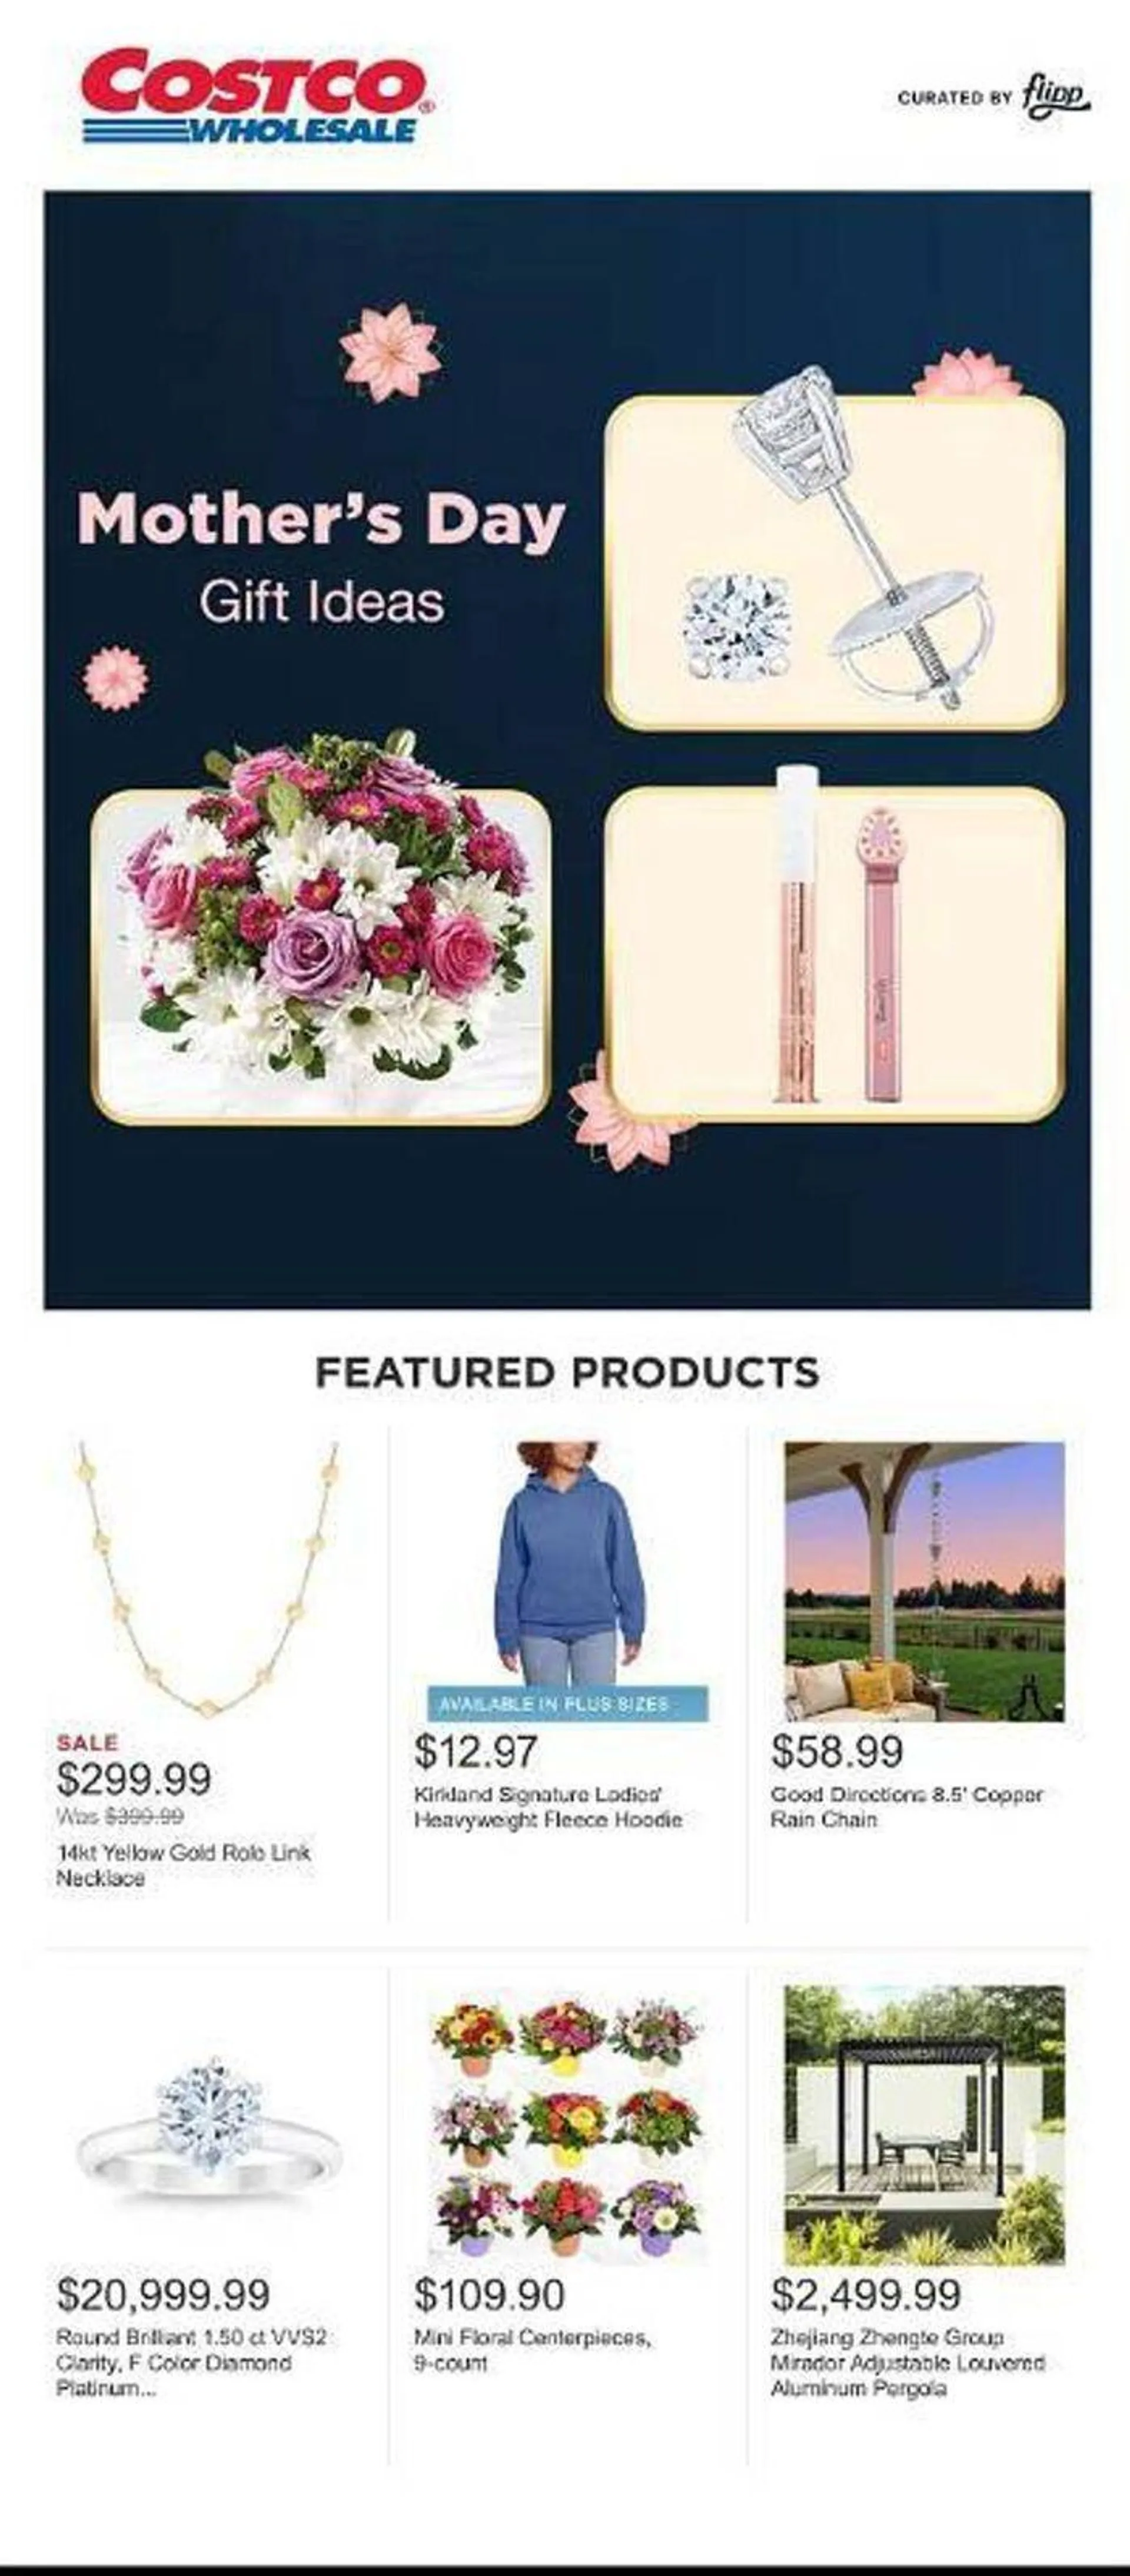 Mothers Day Gift Ideas - 1